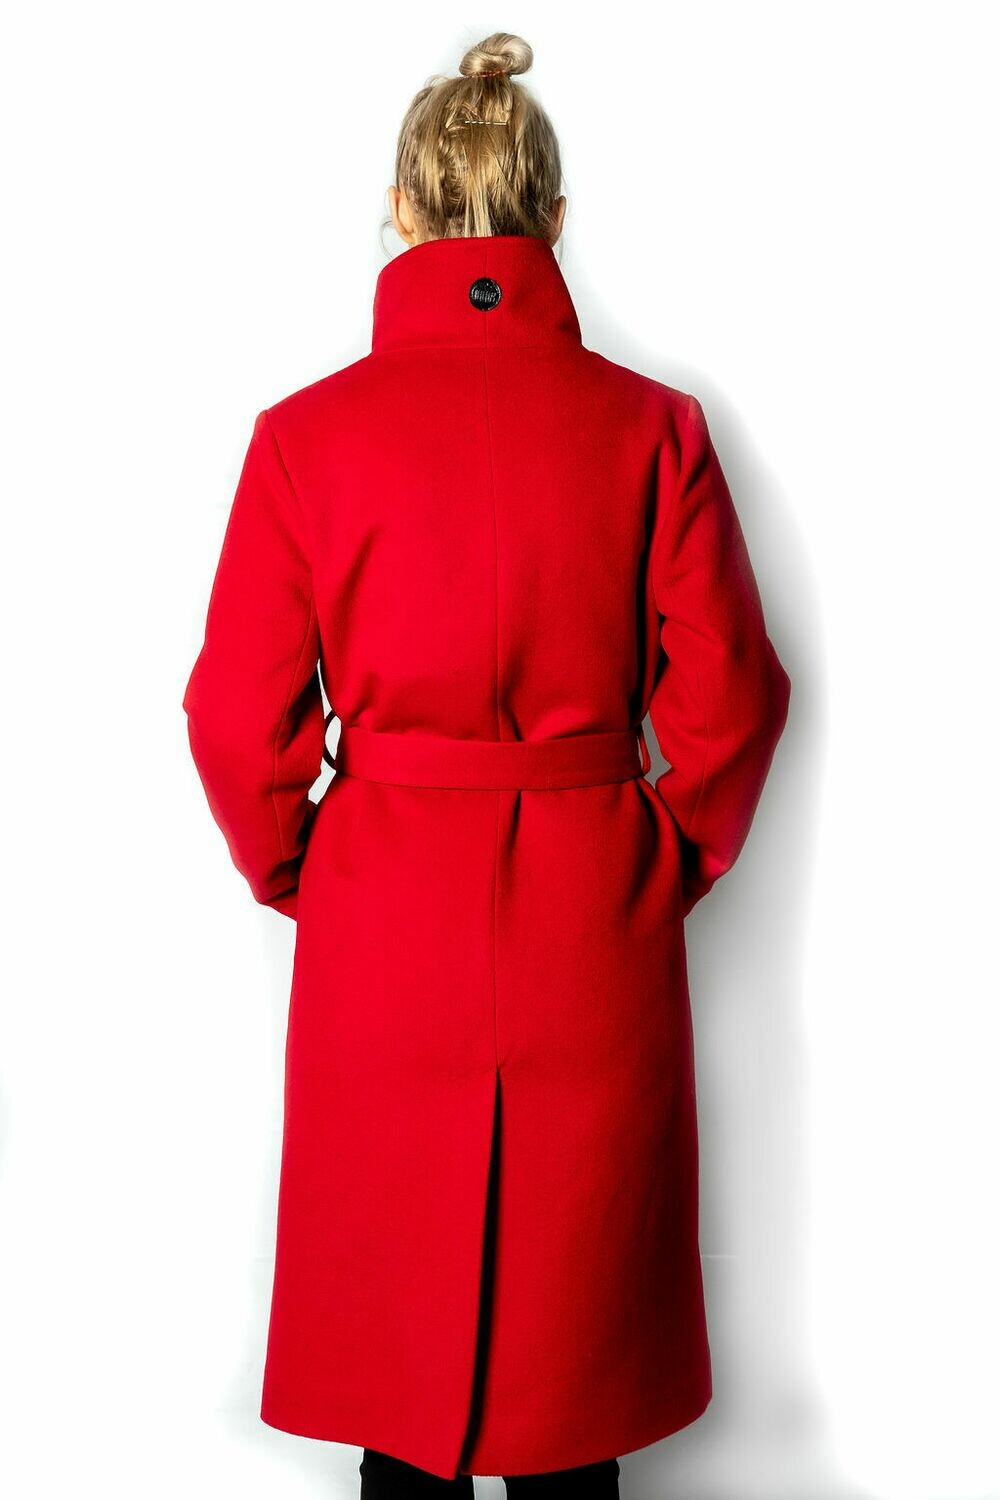 Desloups long women's winter coat with belt in 100% wool and lined